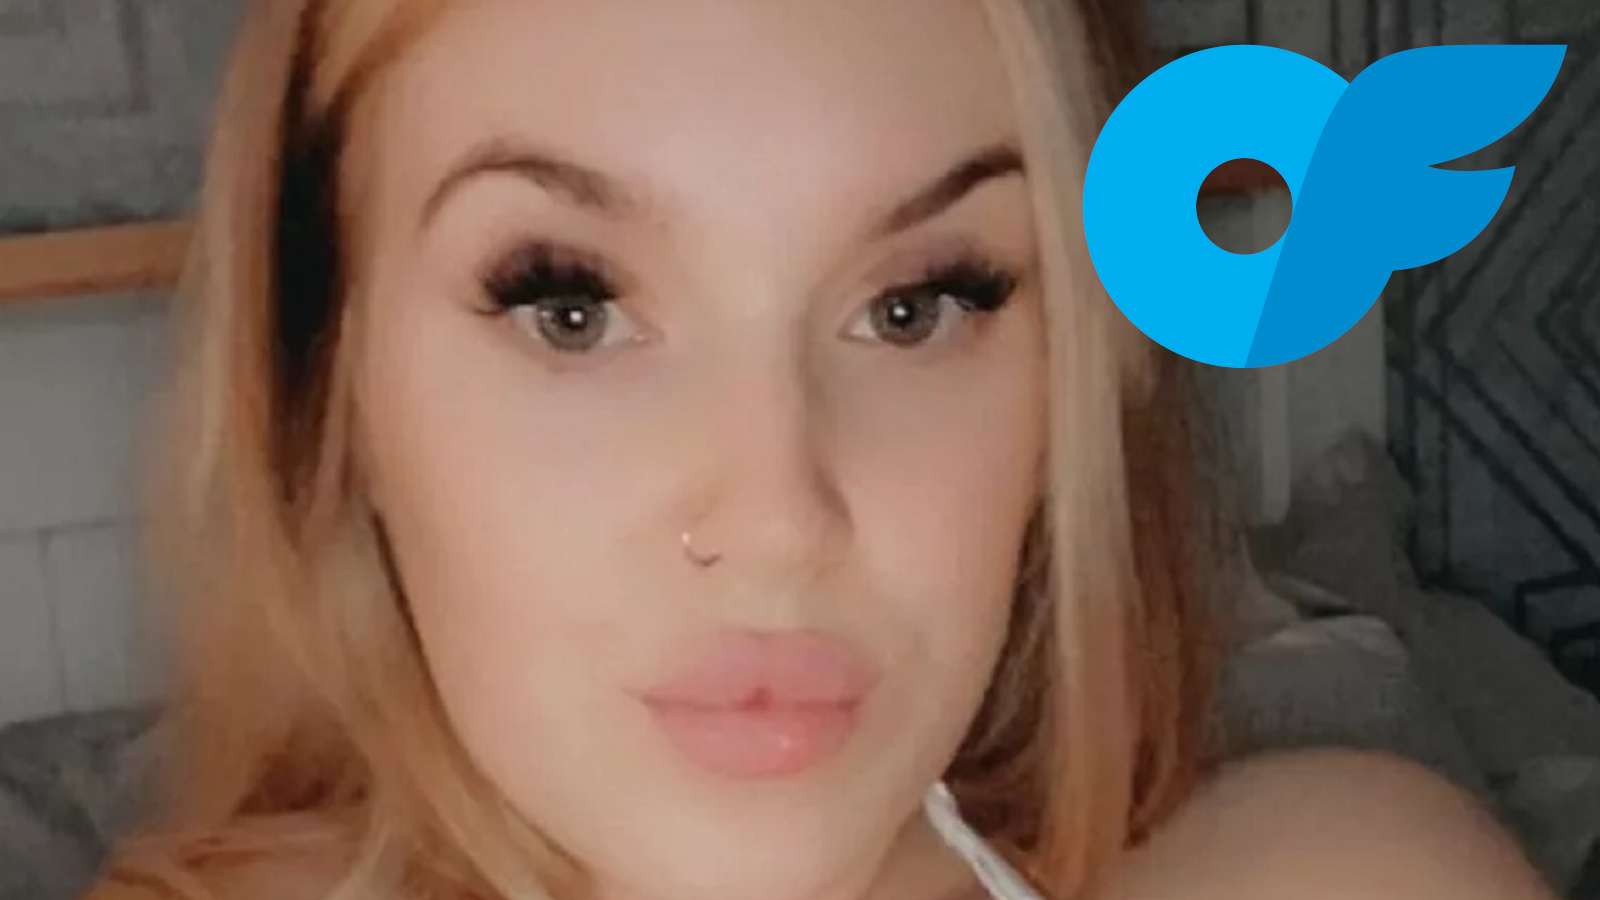 onlyfans model guilty of blackmail